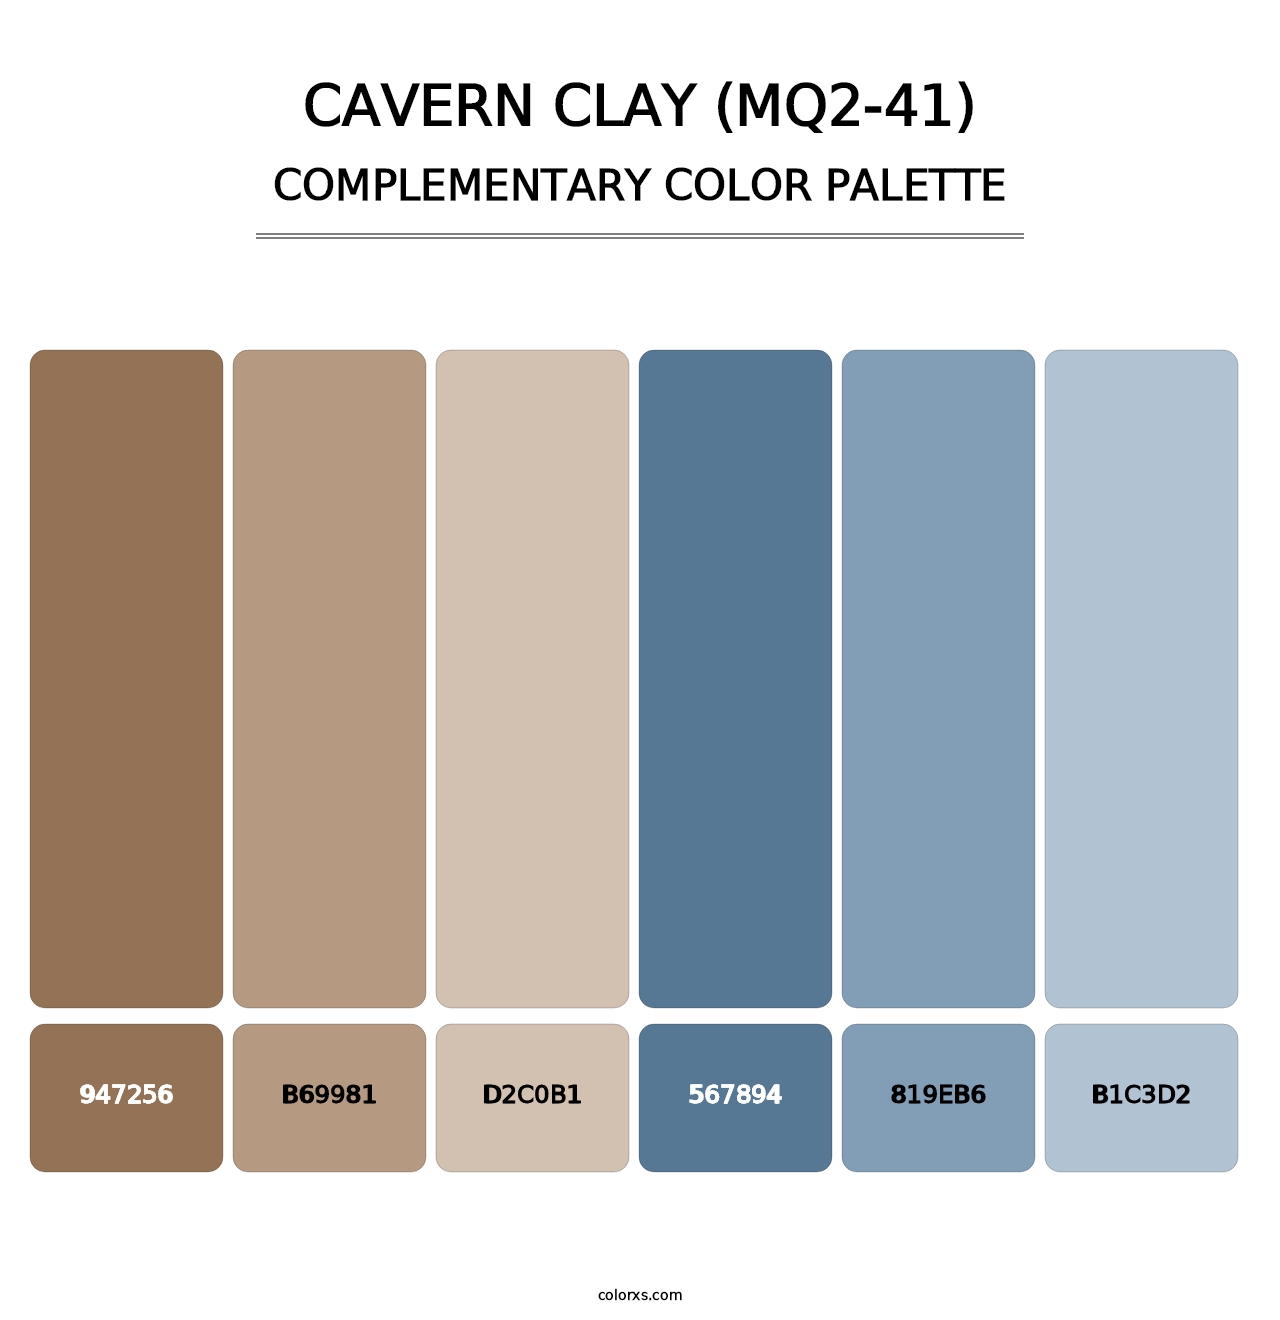 Cavern Clay (MQ2-41) - Complementary Color Palette